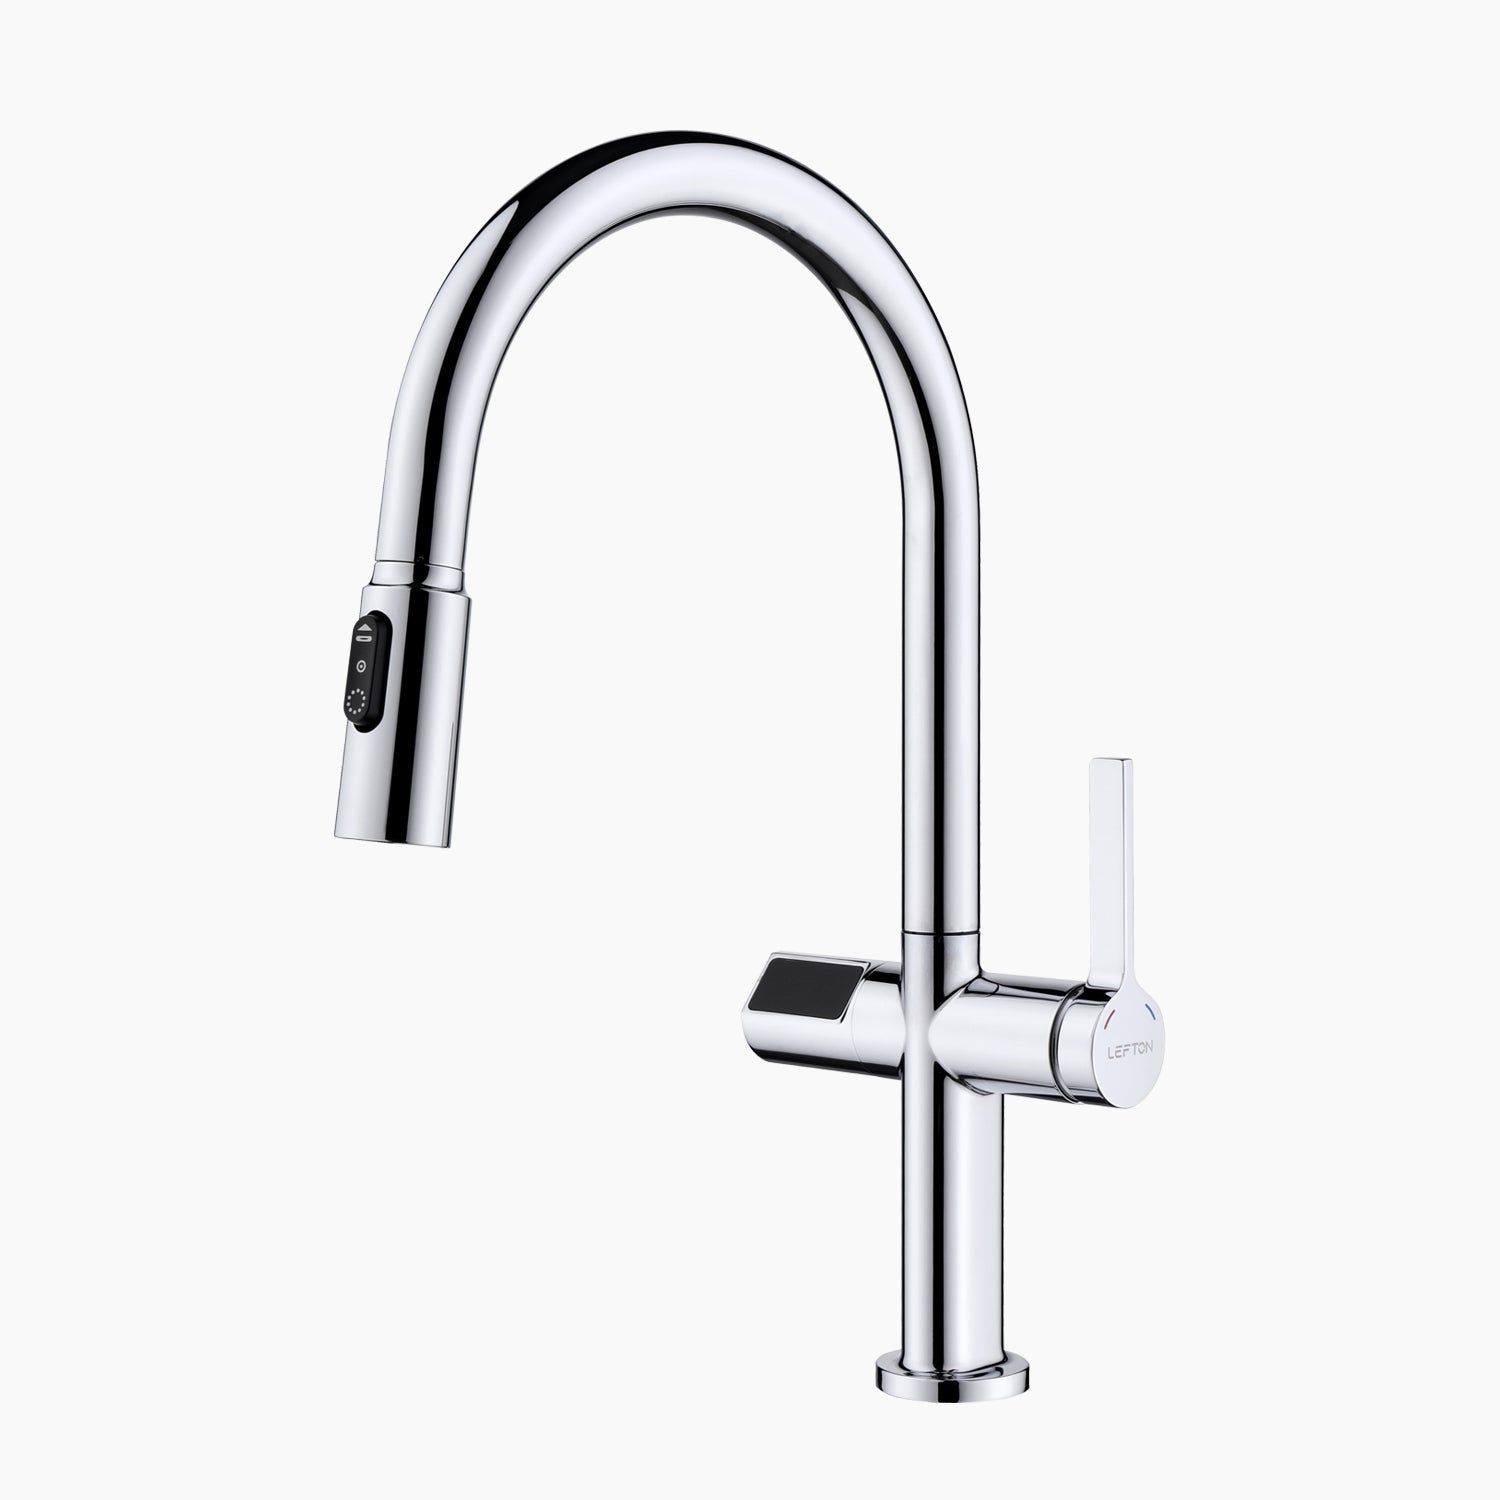 KF2206-1, Lefton Automatic Sensor & Pull-Down Kitchen Faucet with Temperature Display